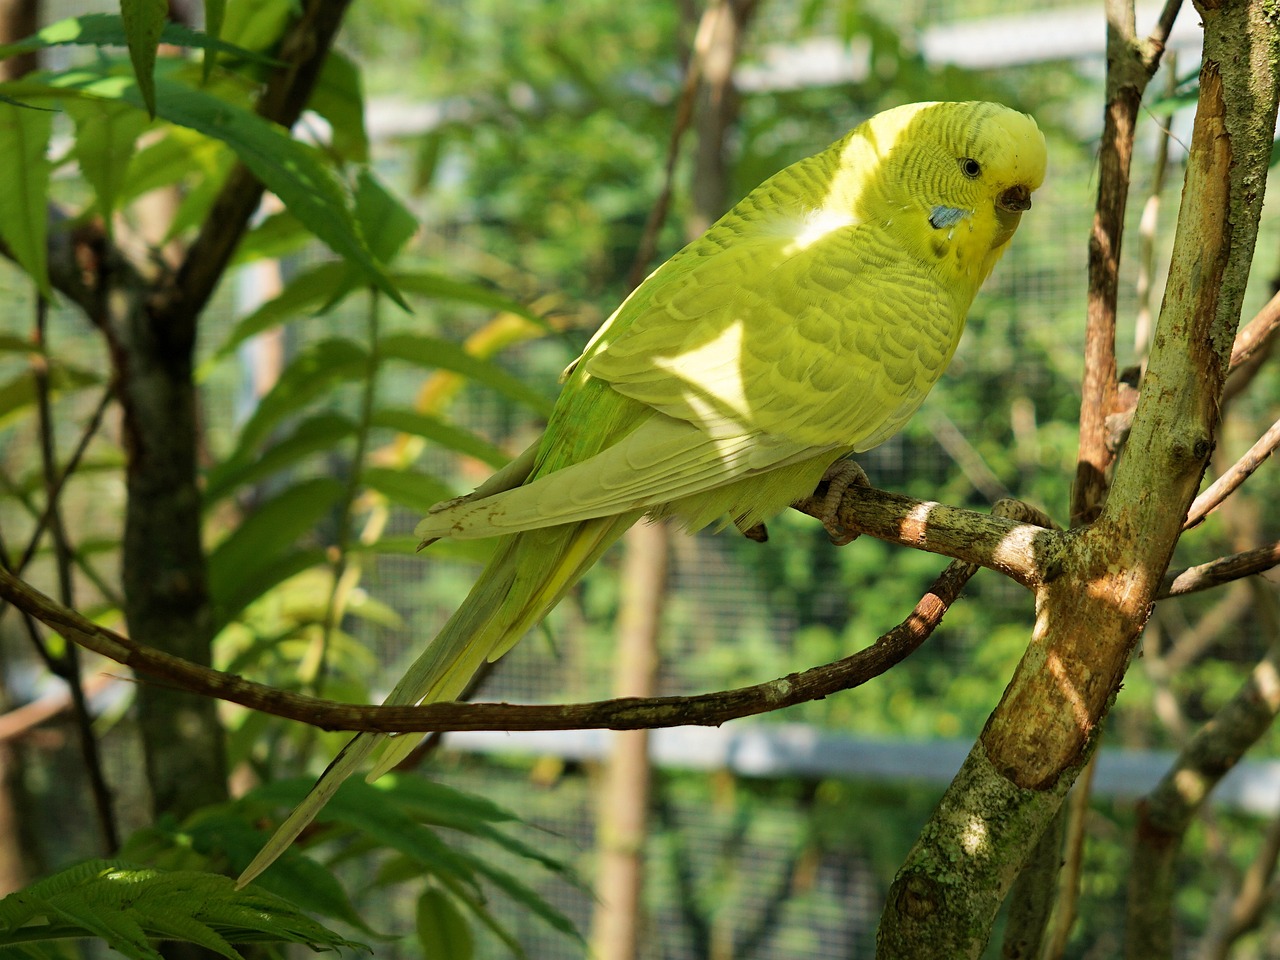 a yellow bird sitting on top of a tree branch, a portrait, green skin with scales, pet, vanilla - colored lighting, a bald